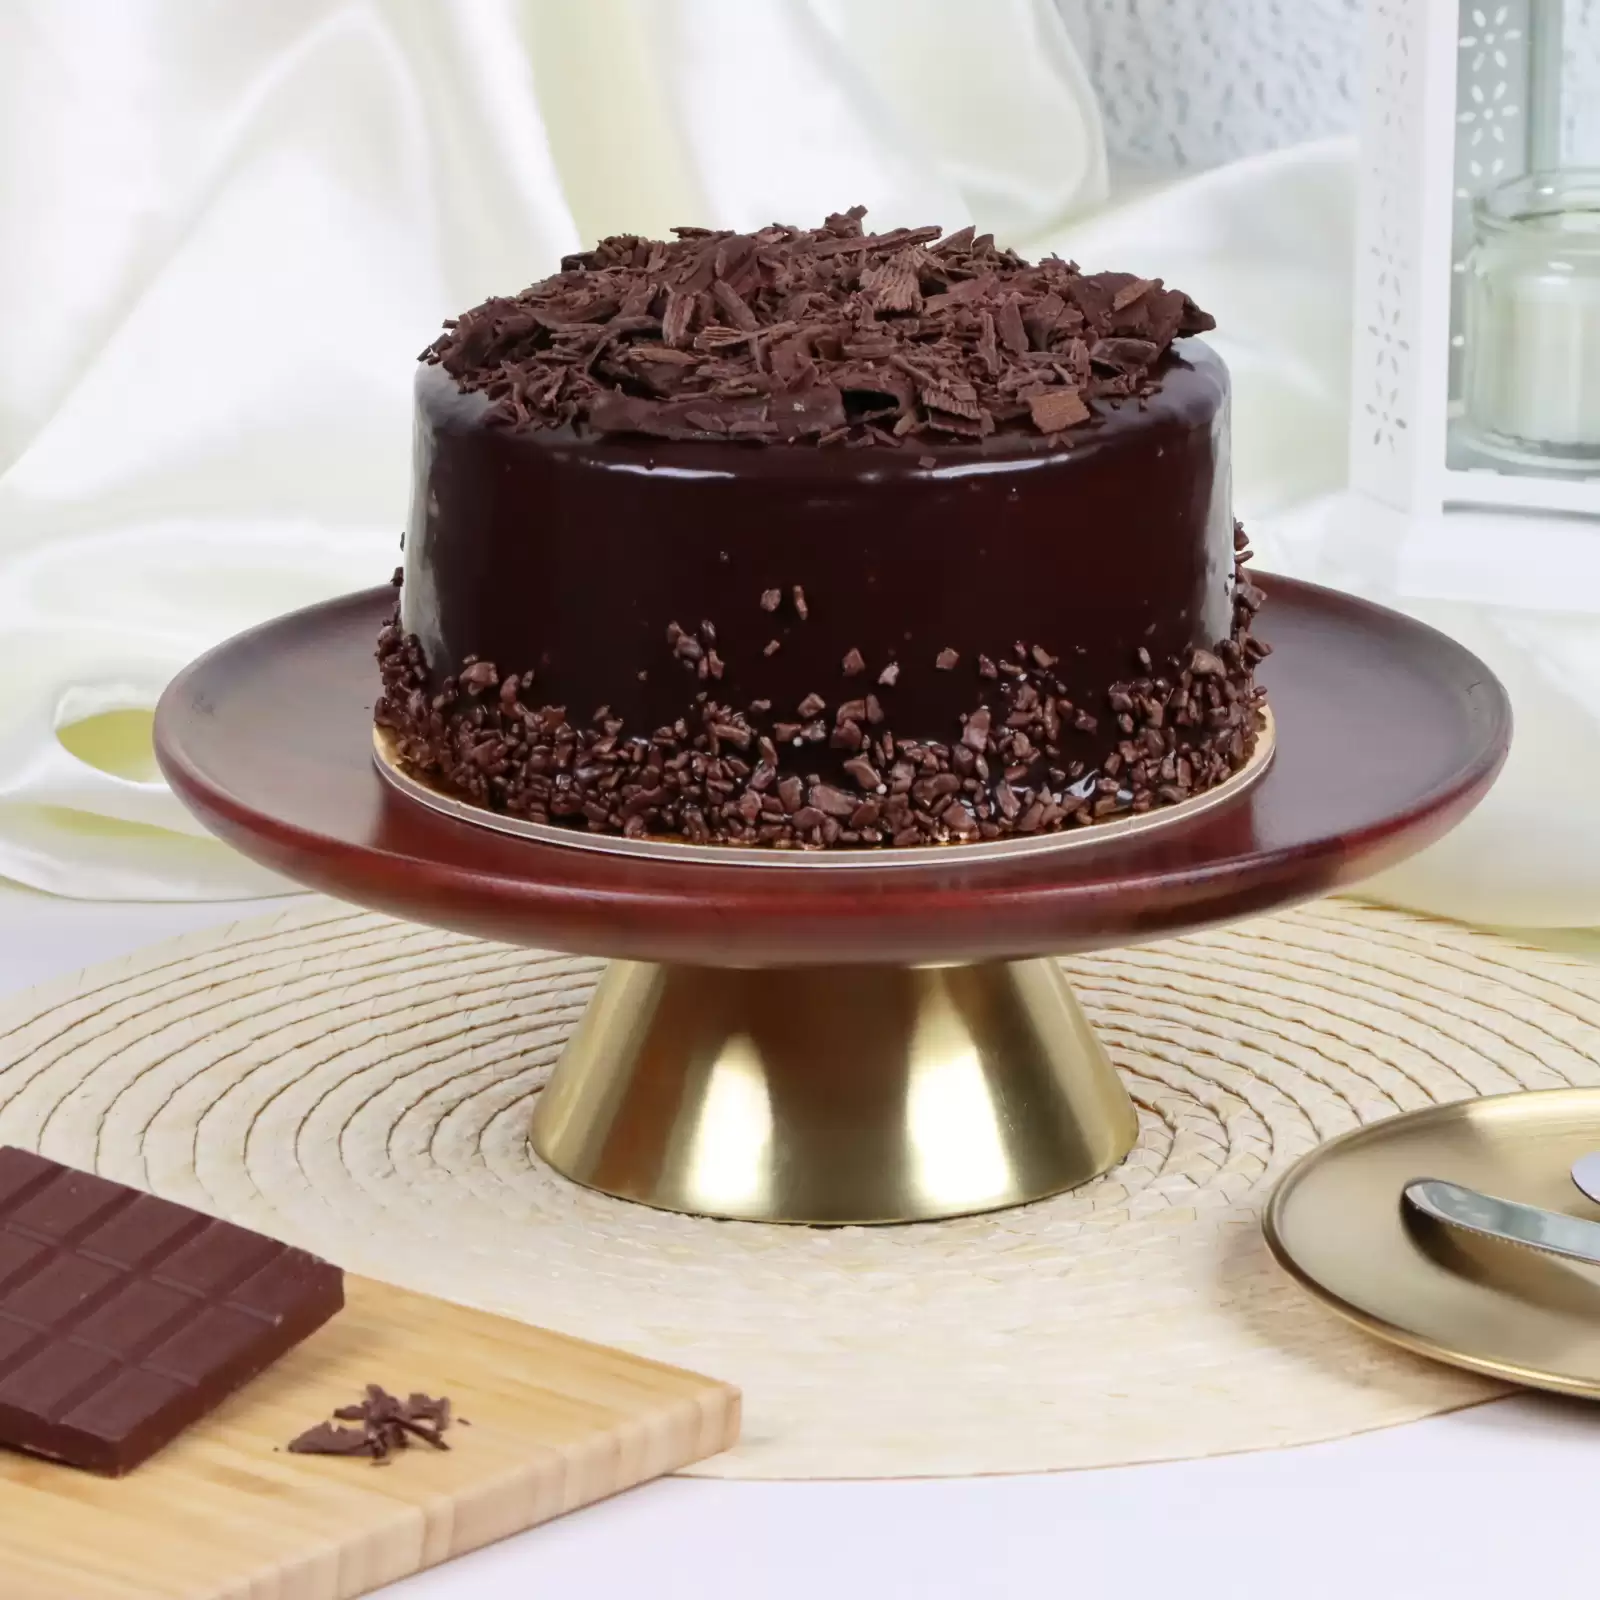 Buy/Send Chocolate Truffle Cake Online | Cakes Delivery In Bahrain - Flora D'lite